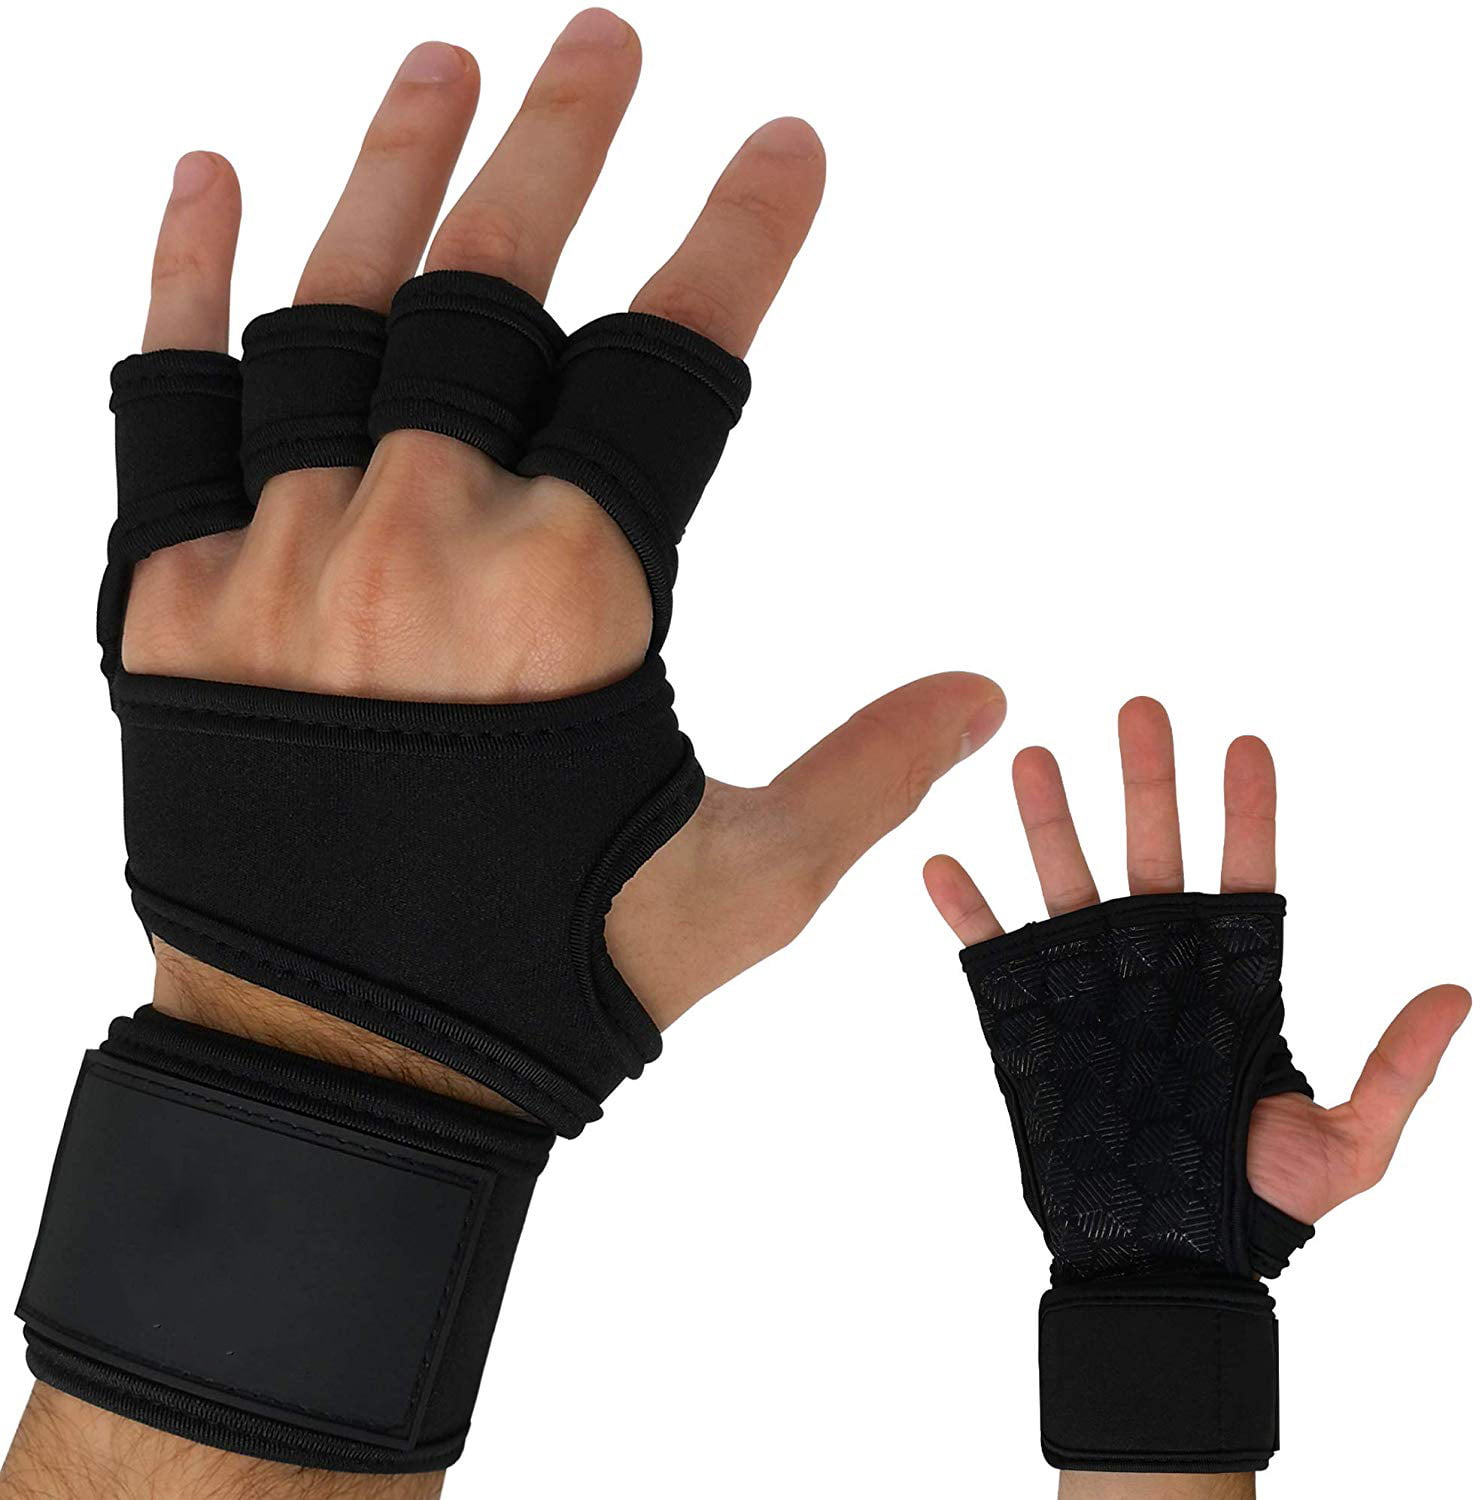 Wrist Brace Wrap Support Gym Workout Gloves Palm Padding Weightlifting S,M,L 